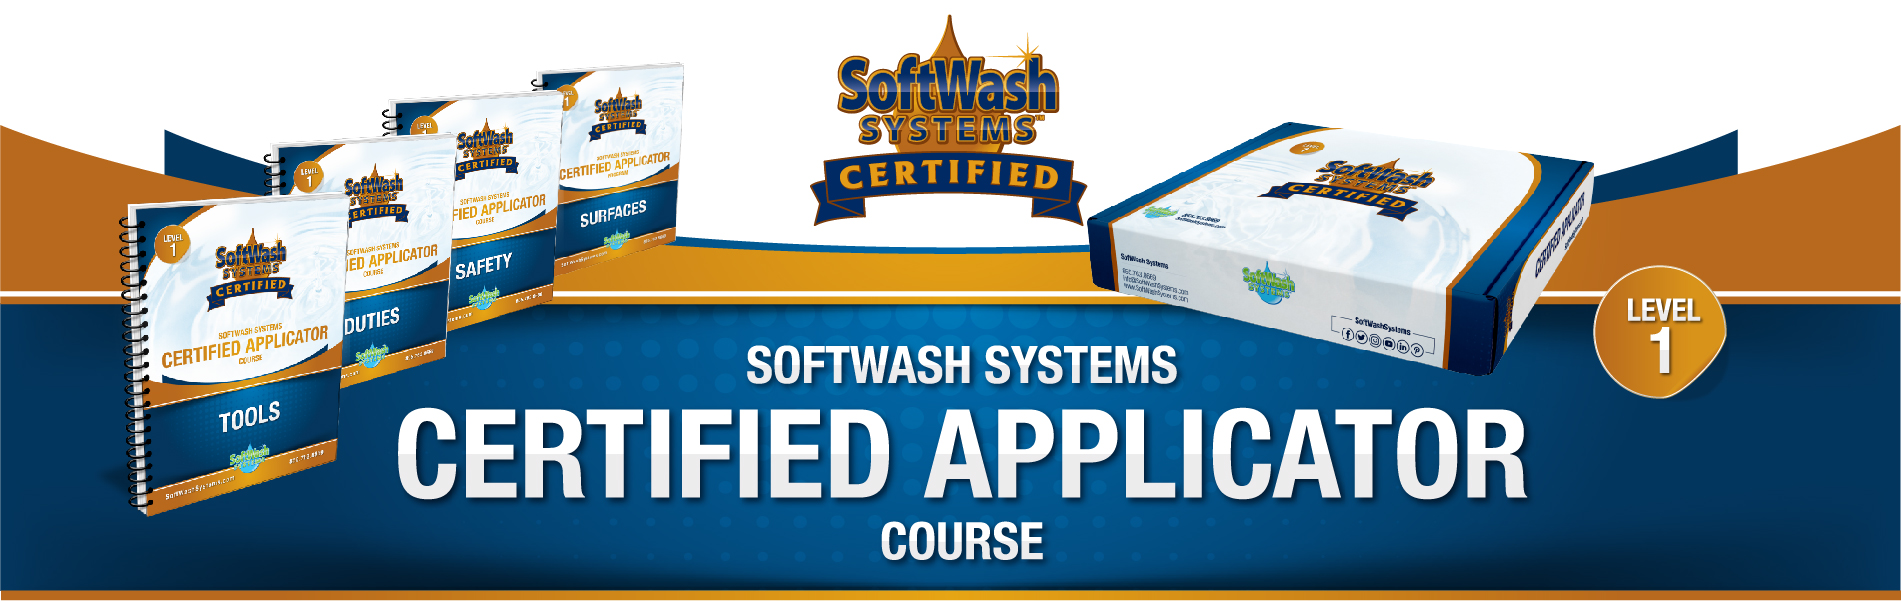 CERTIFIED APPLICATOR COURSE